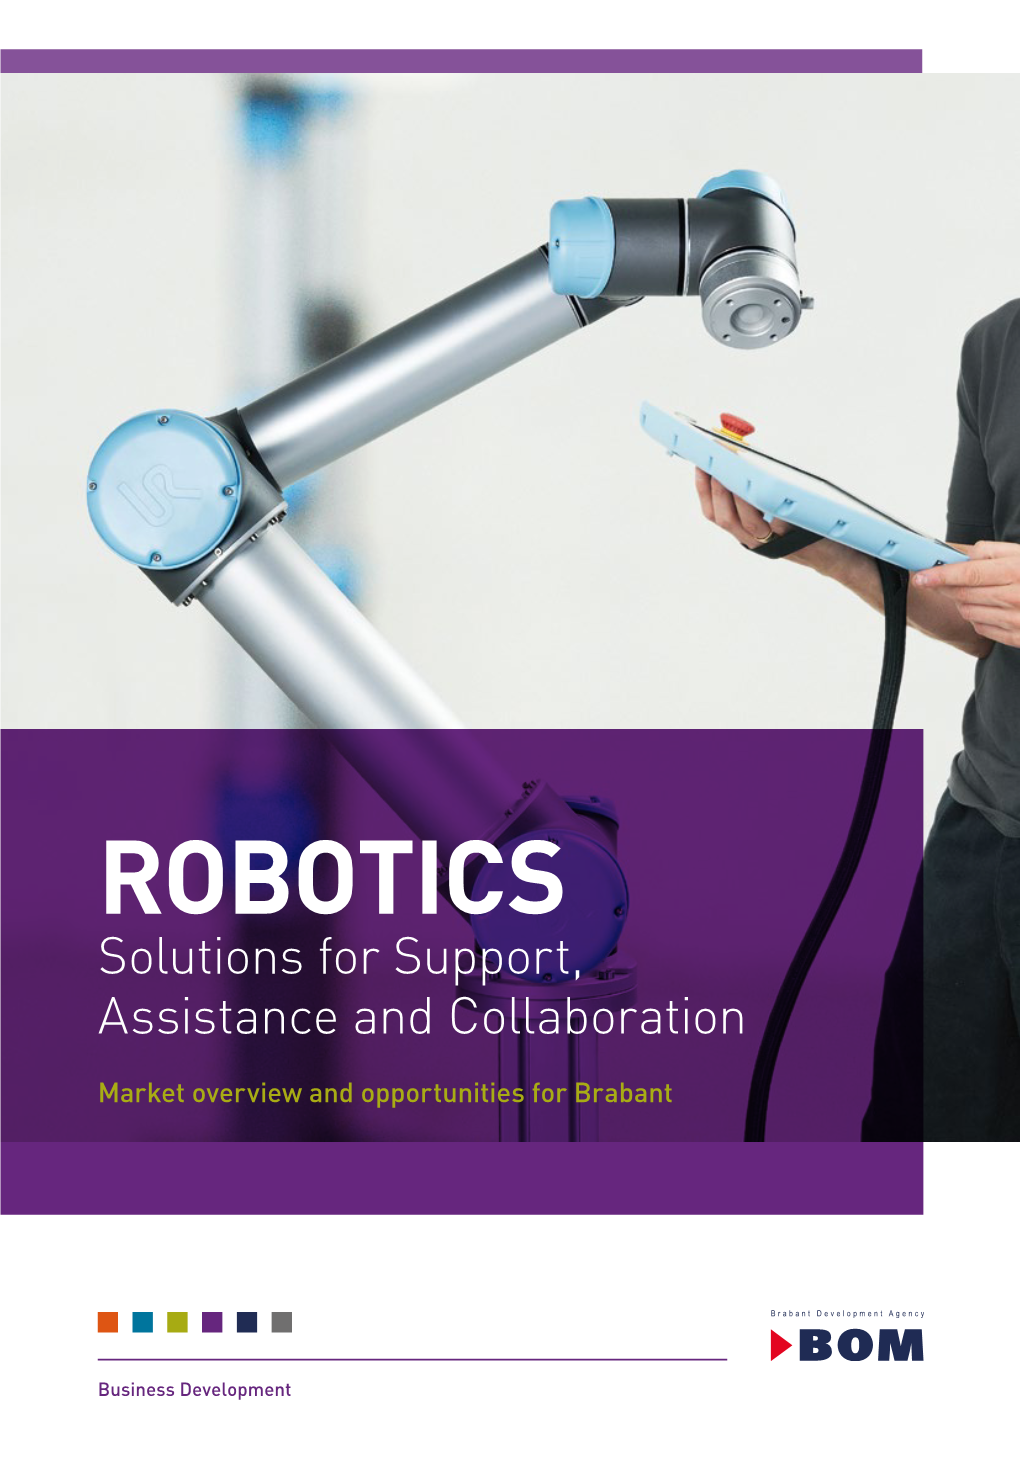 Robotics, Solutions for Support, Assistance and Collaboration